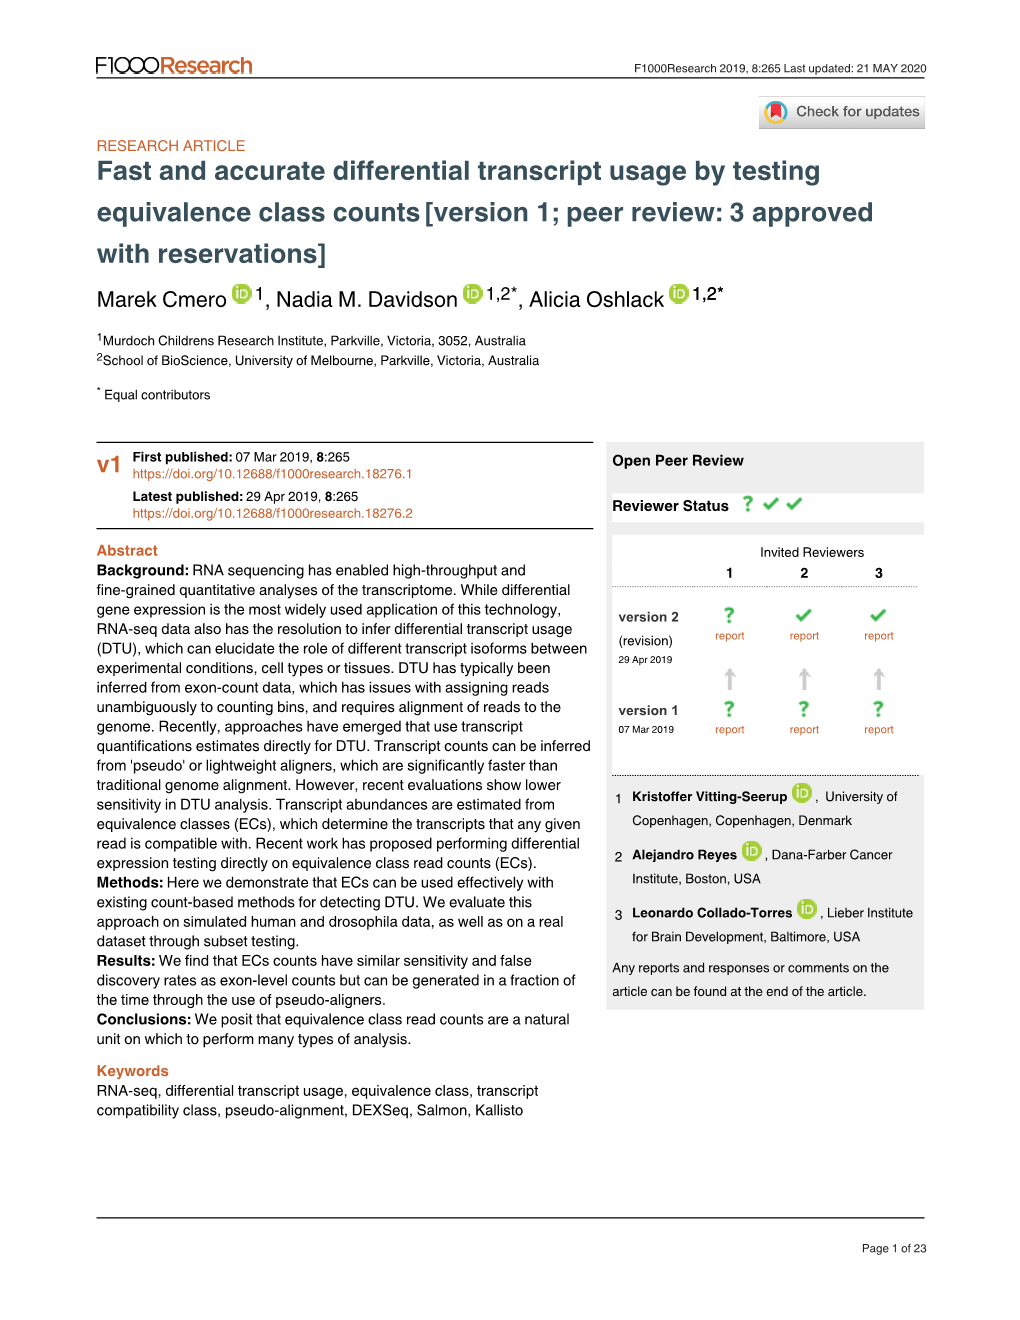 Fast and Accurate Differential Transcript Usage by Testing Equivalence Class Counts [Version 1; Peer Review: 3 Approved with Reservations] Marek Cmero 1, Nadia M